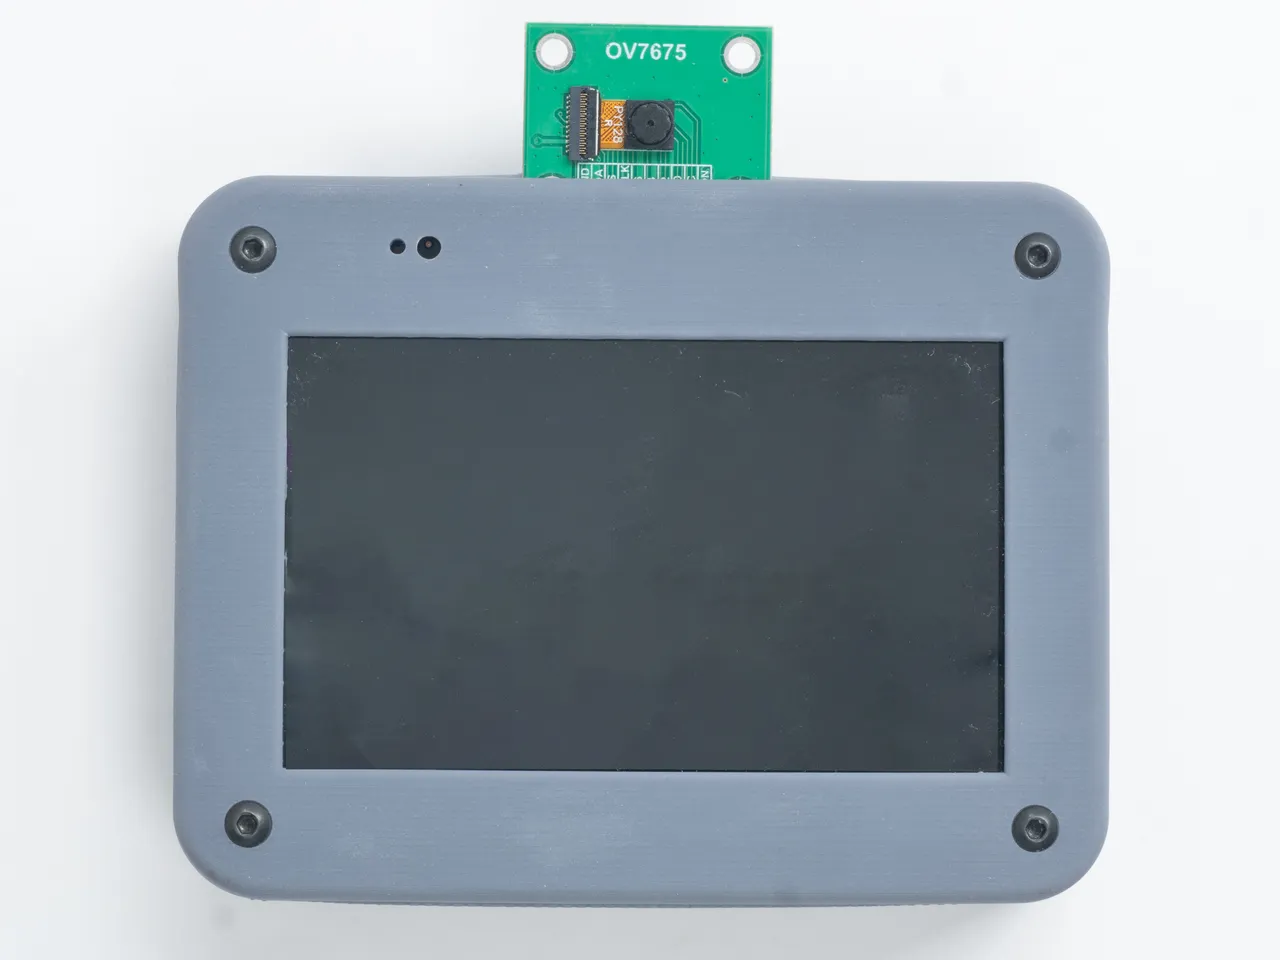 Enclosure for Arduino GIGA R1 WiFi and GIGA Display Shield by